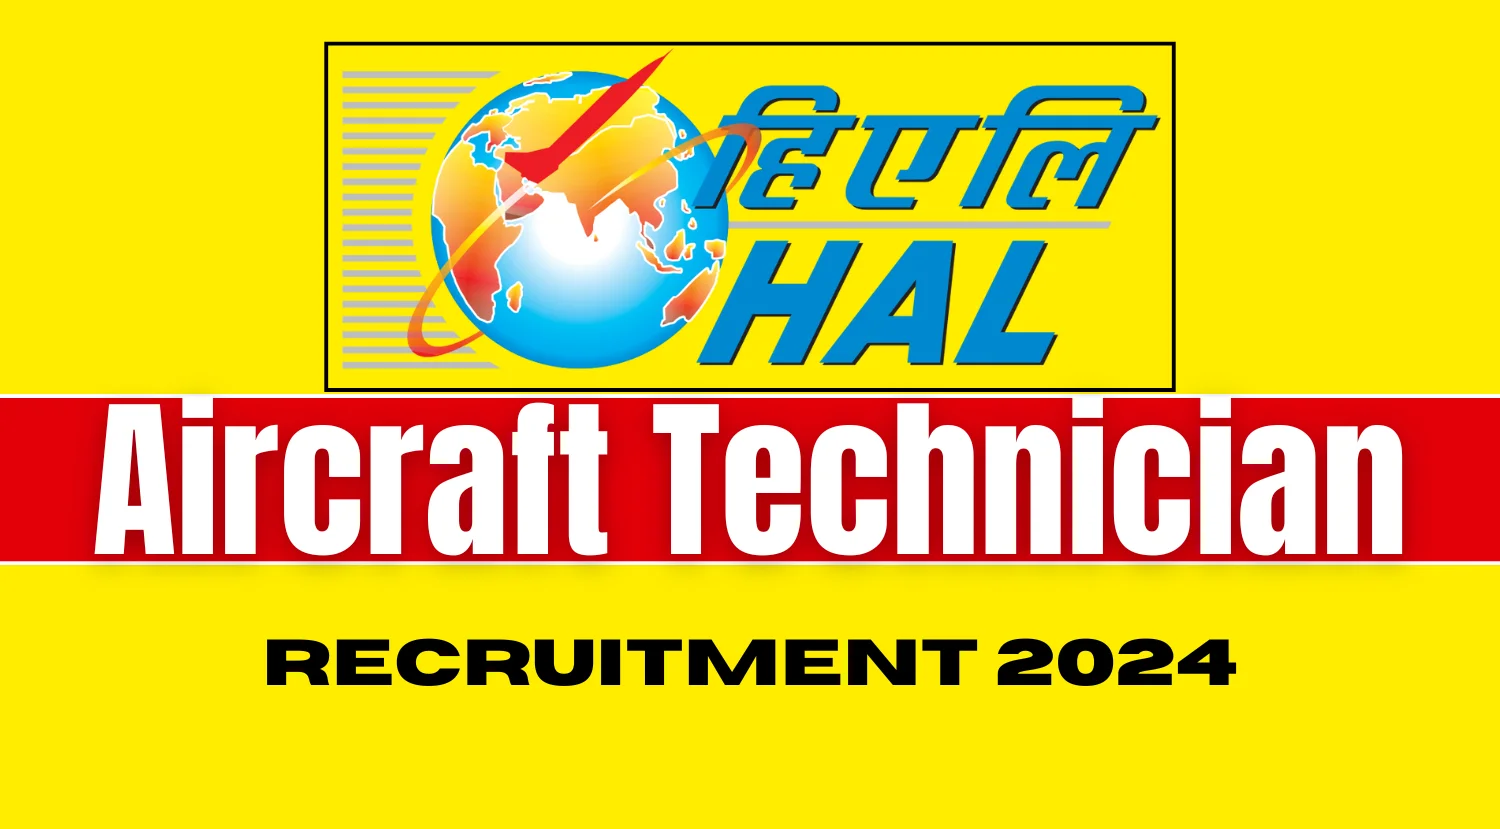 HAL Recruitment 2024  for Aircraft Technicians, Check Eligibility and Apply Now